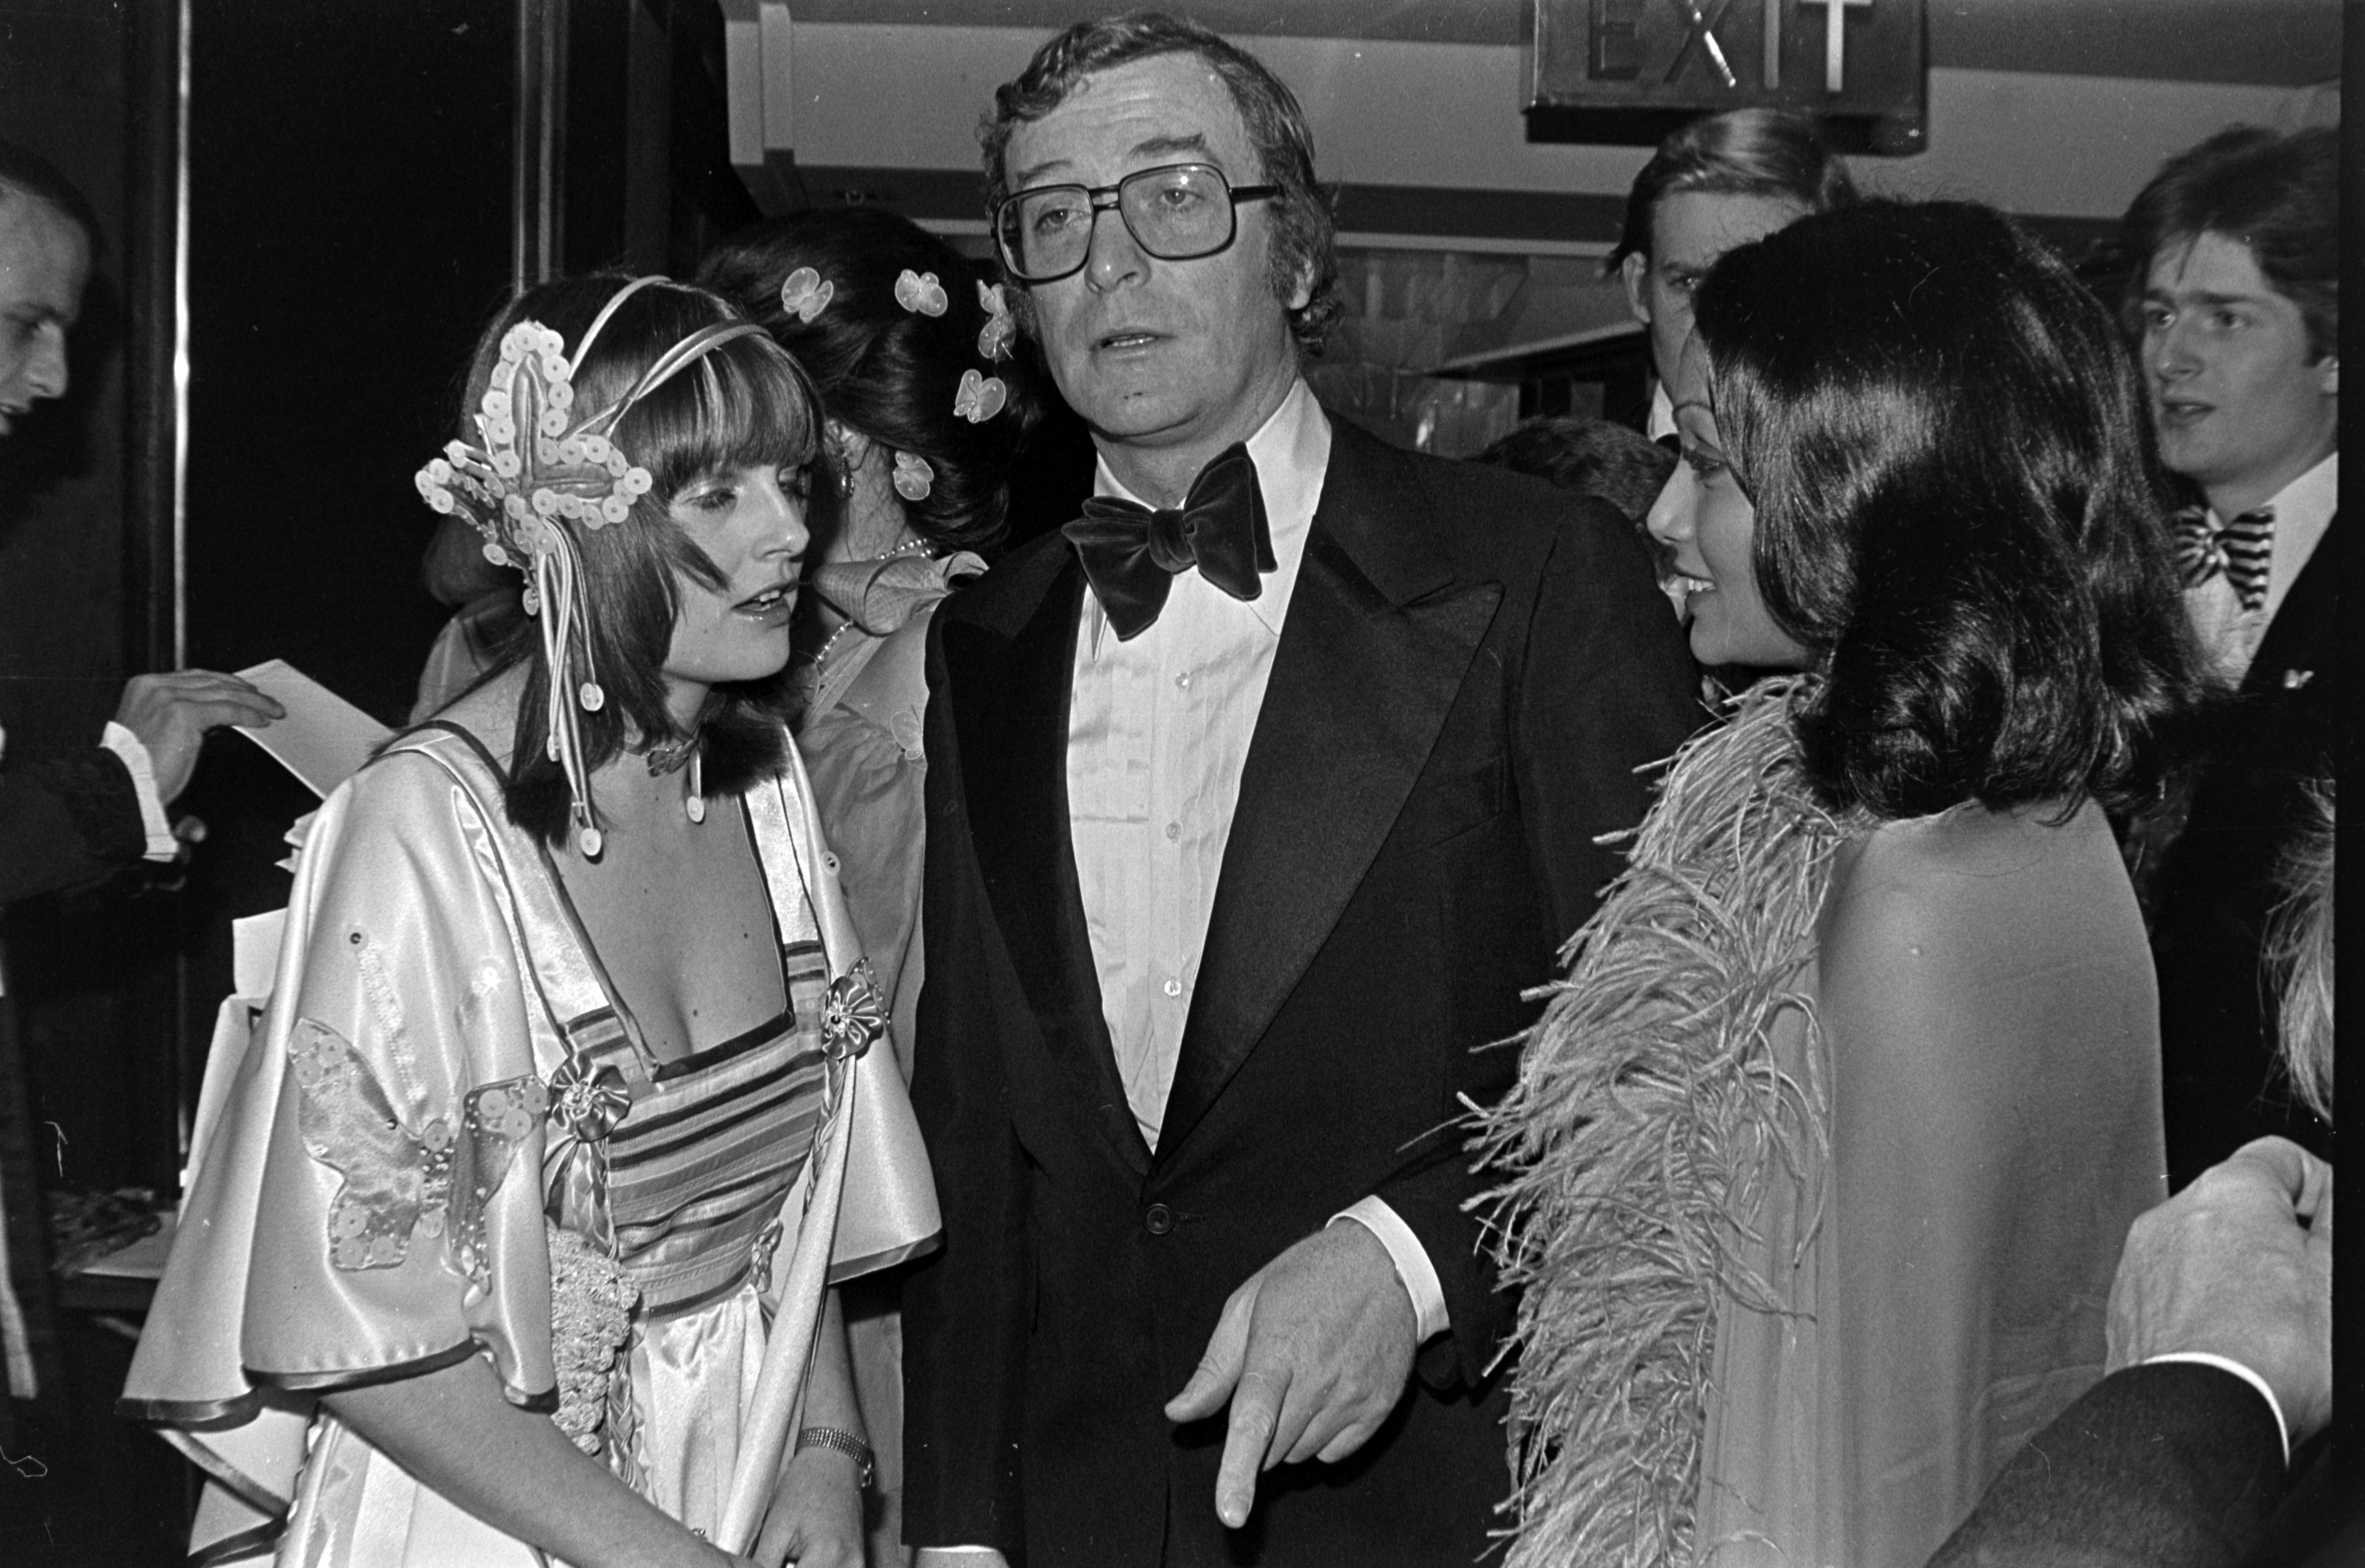 Lady Jane Wellesley, Michael Caine, and Shakira Caine attend a gala at the Intercontinental Hotel in London, England, on March 4, 1976.| Source: Getty Images